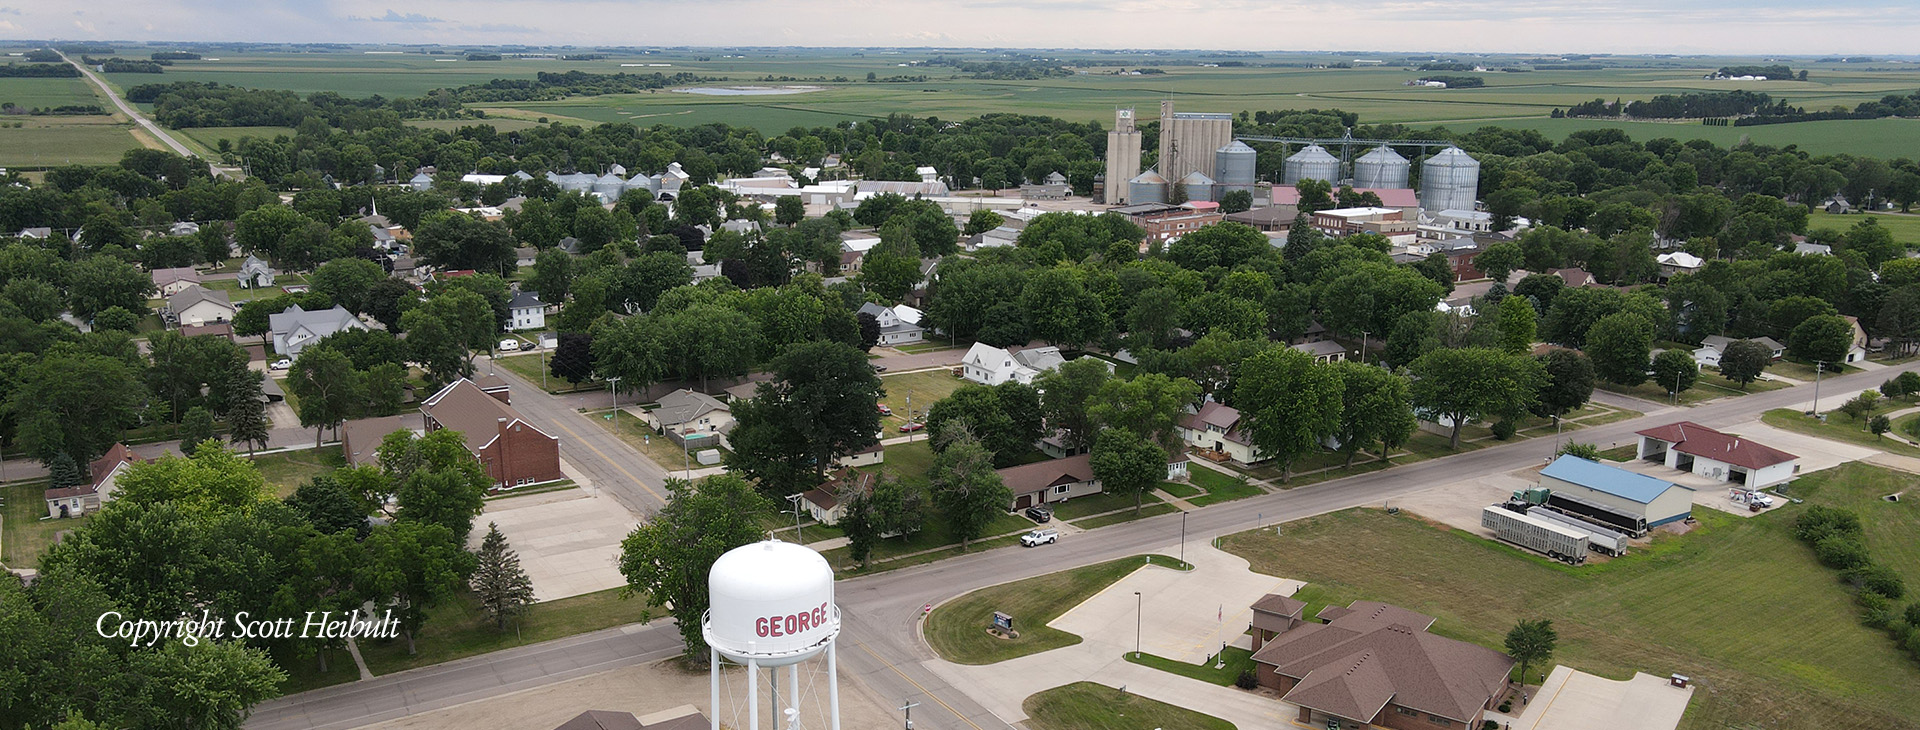 overhead_view_from_water_tower.jpg